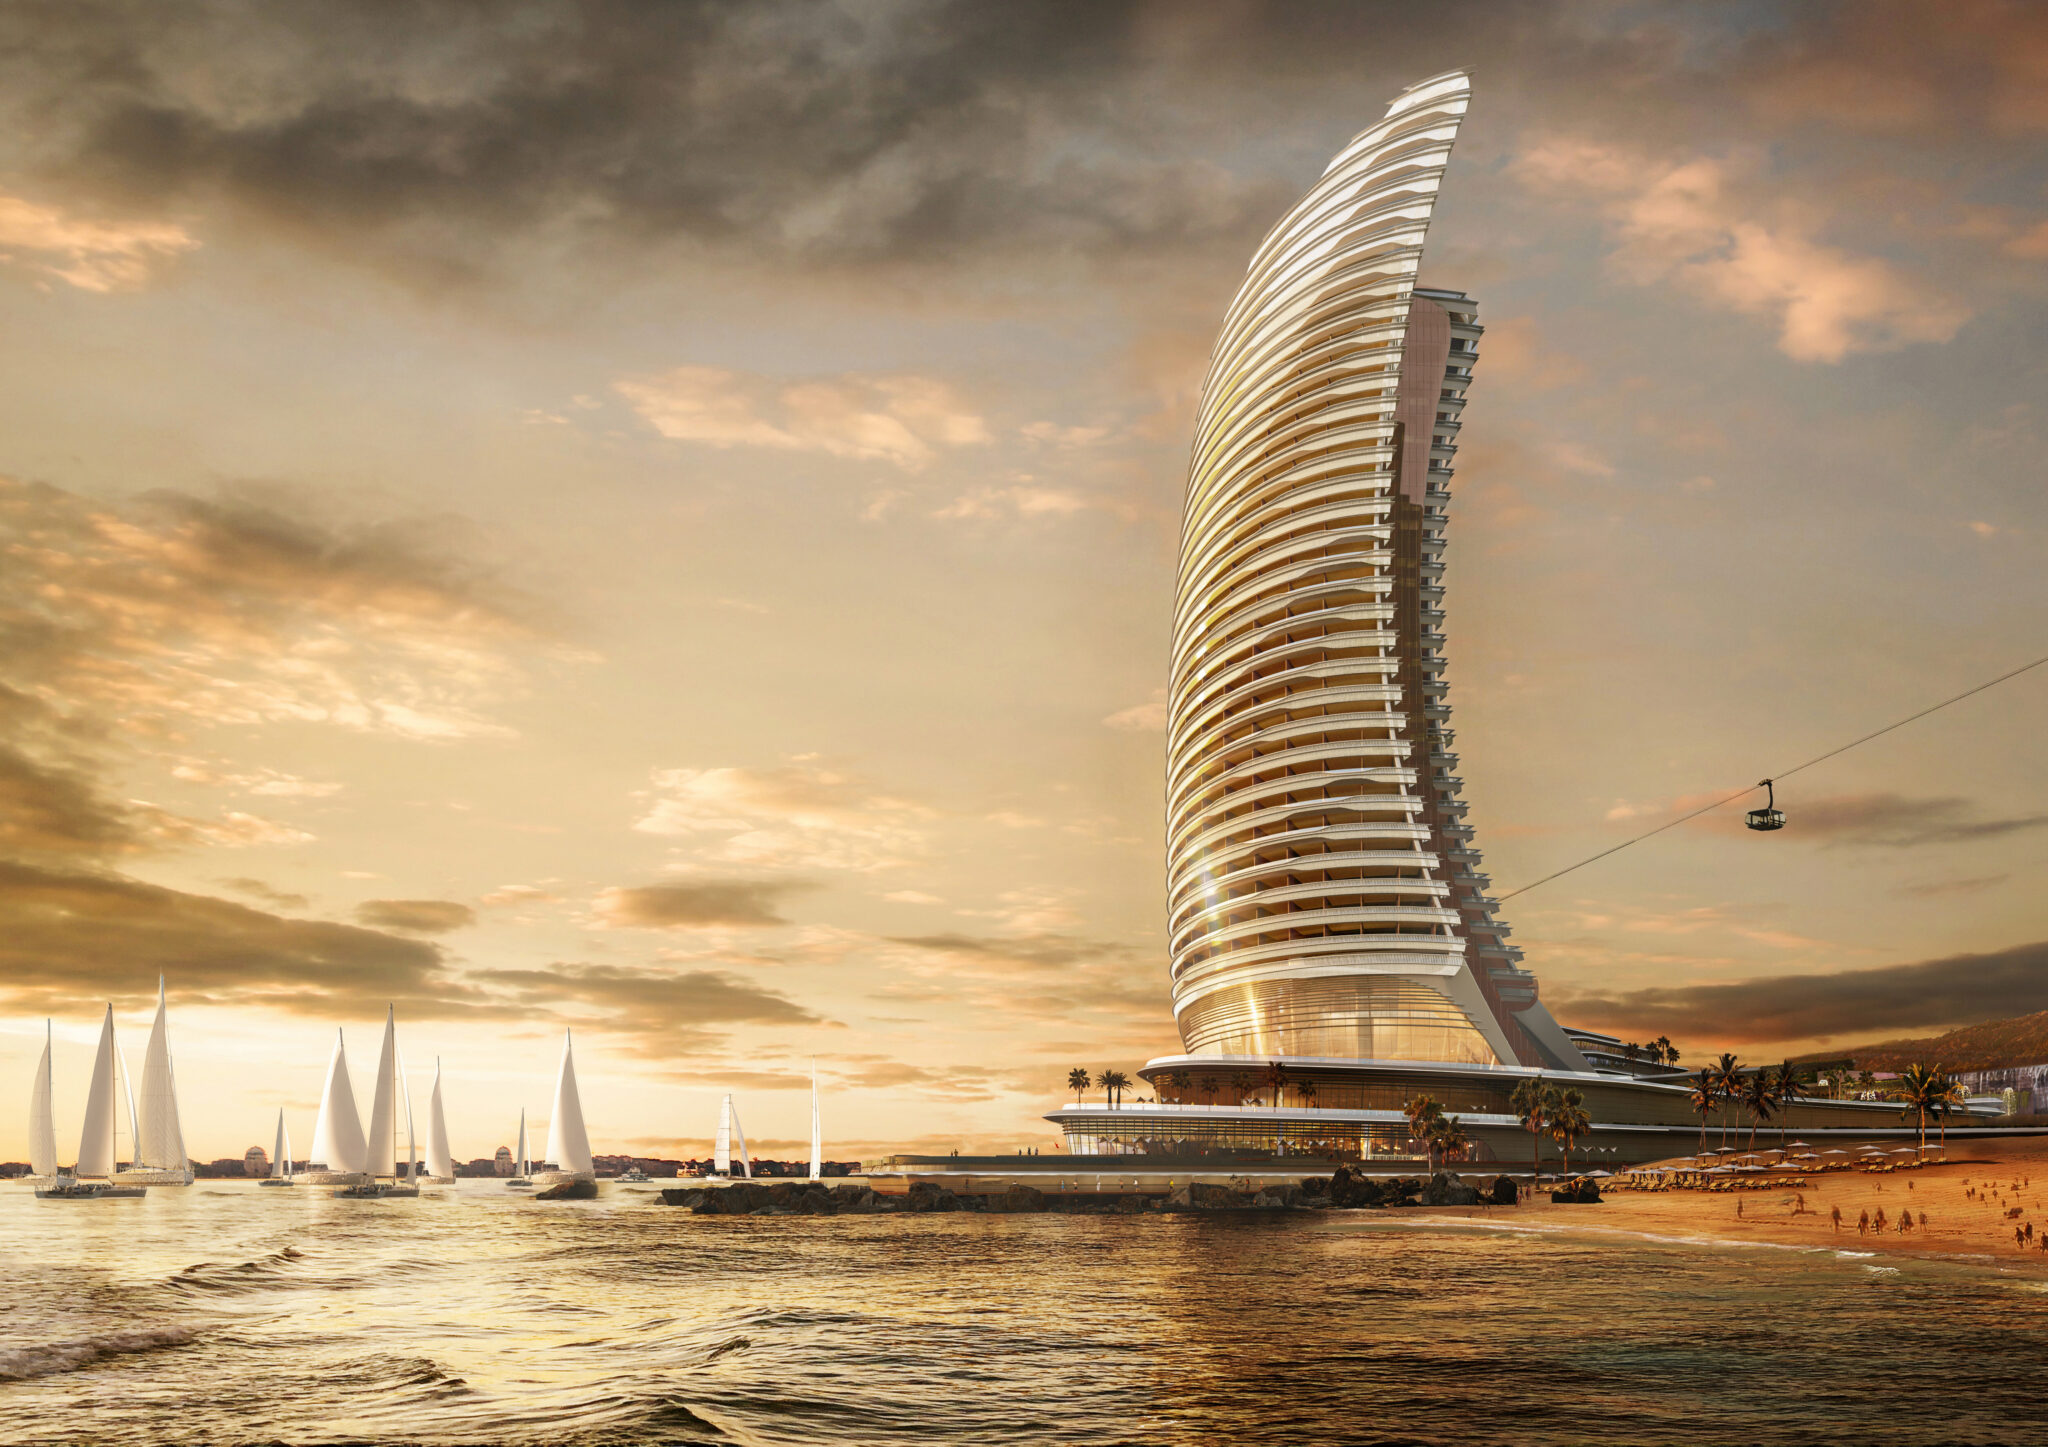 The Luxury Collection Resort, Hon Thom Island will be a spectacular sail-shaped hotel nestled directly on the shore